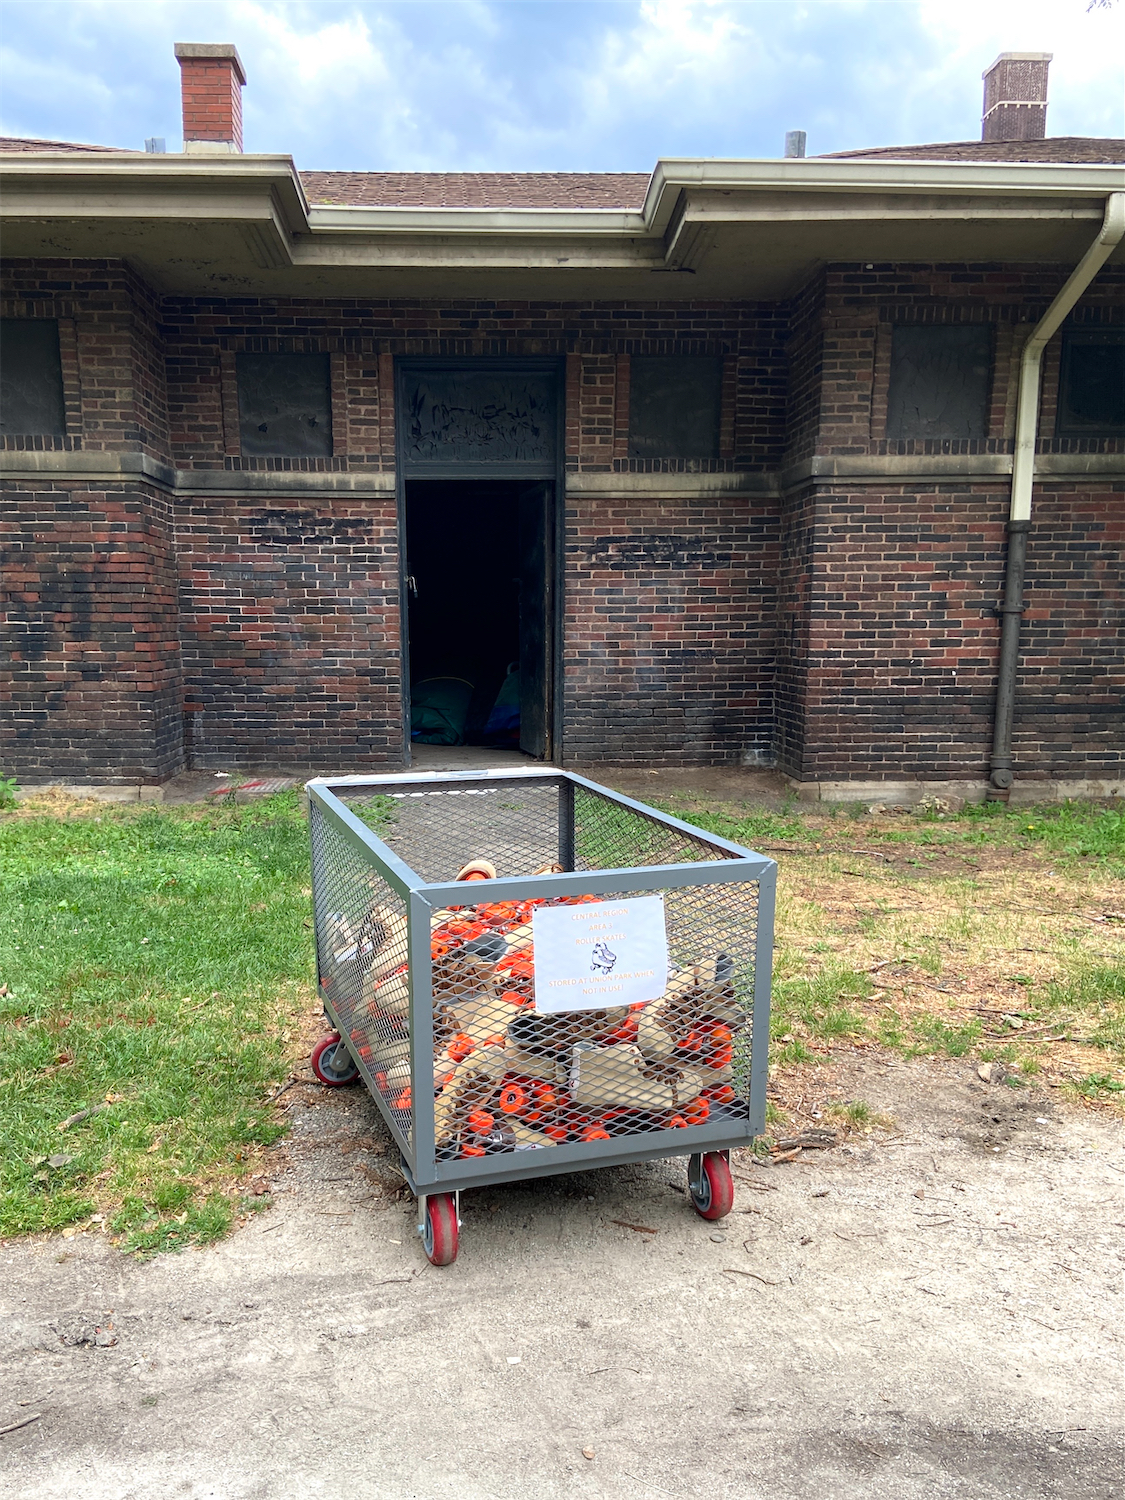 A metal cart full of old school roller skates with bright orange wheels, in front of an old brick field house at Union Park in Chicago.